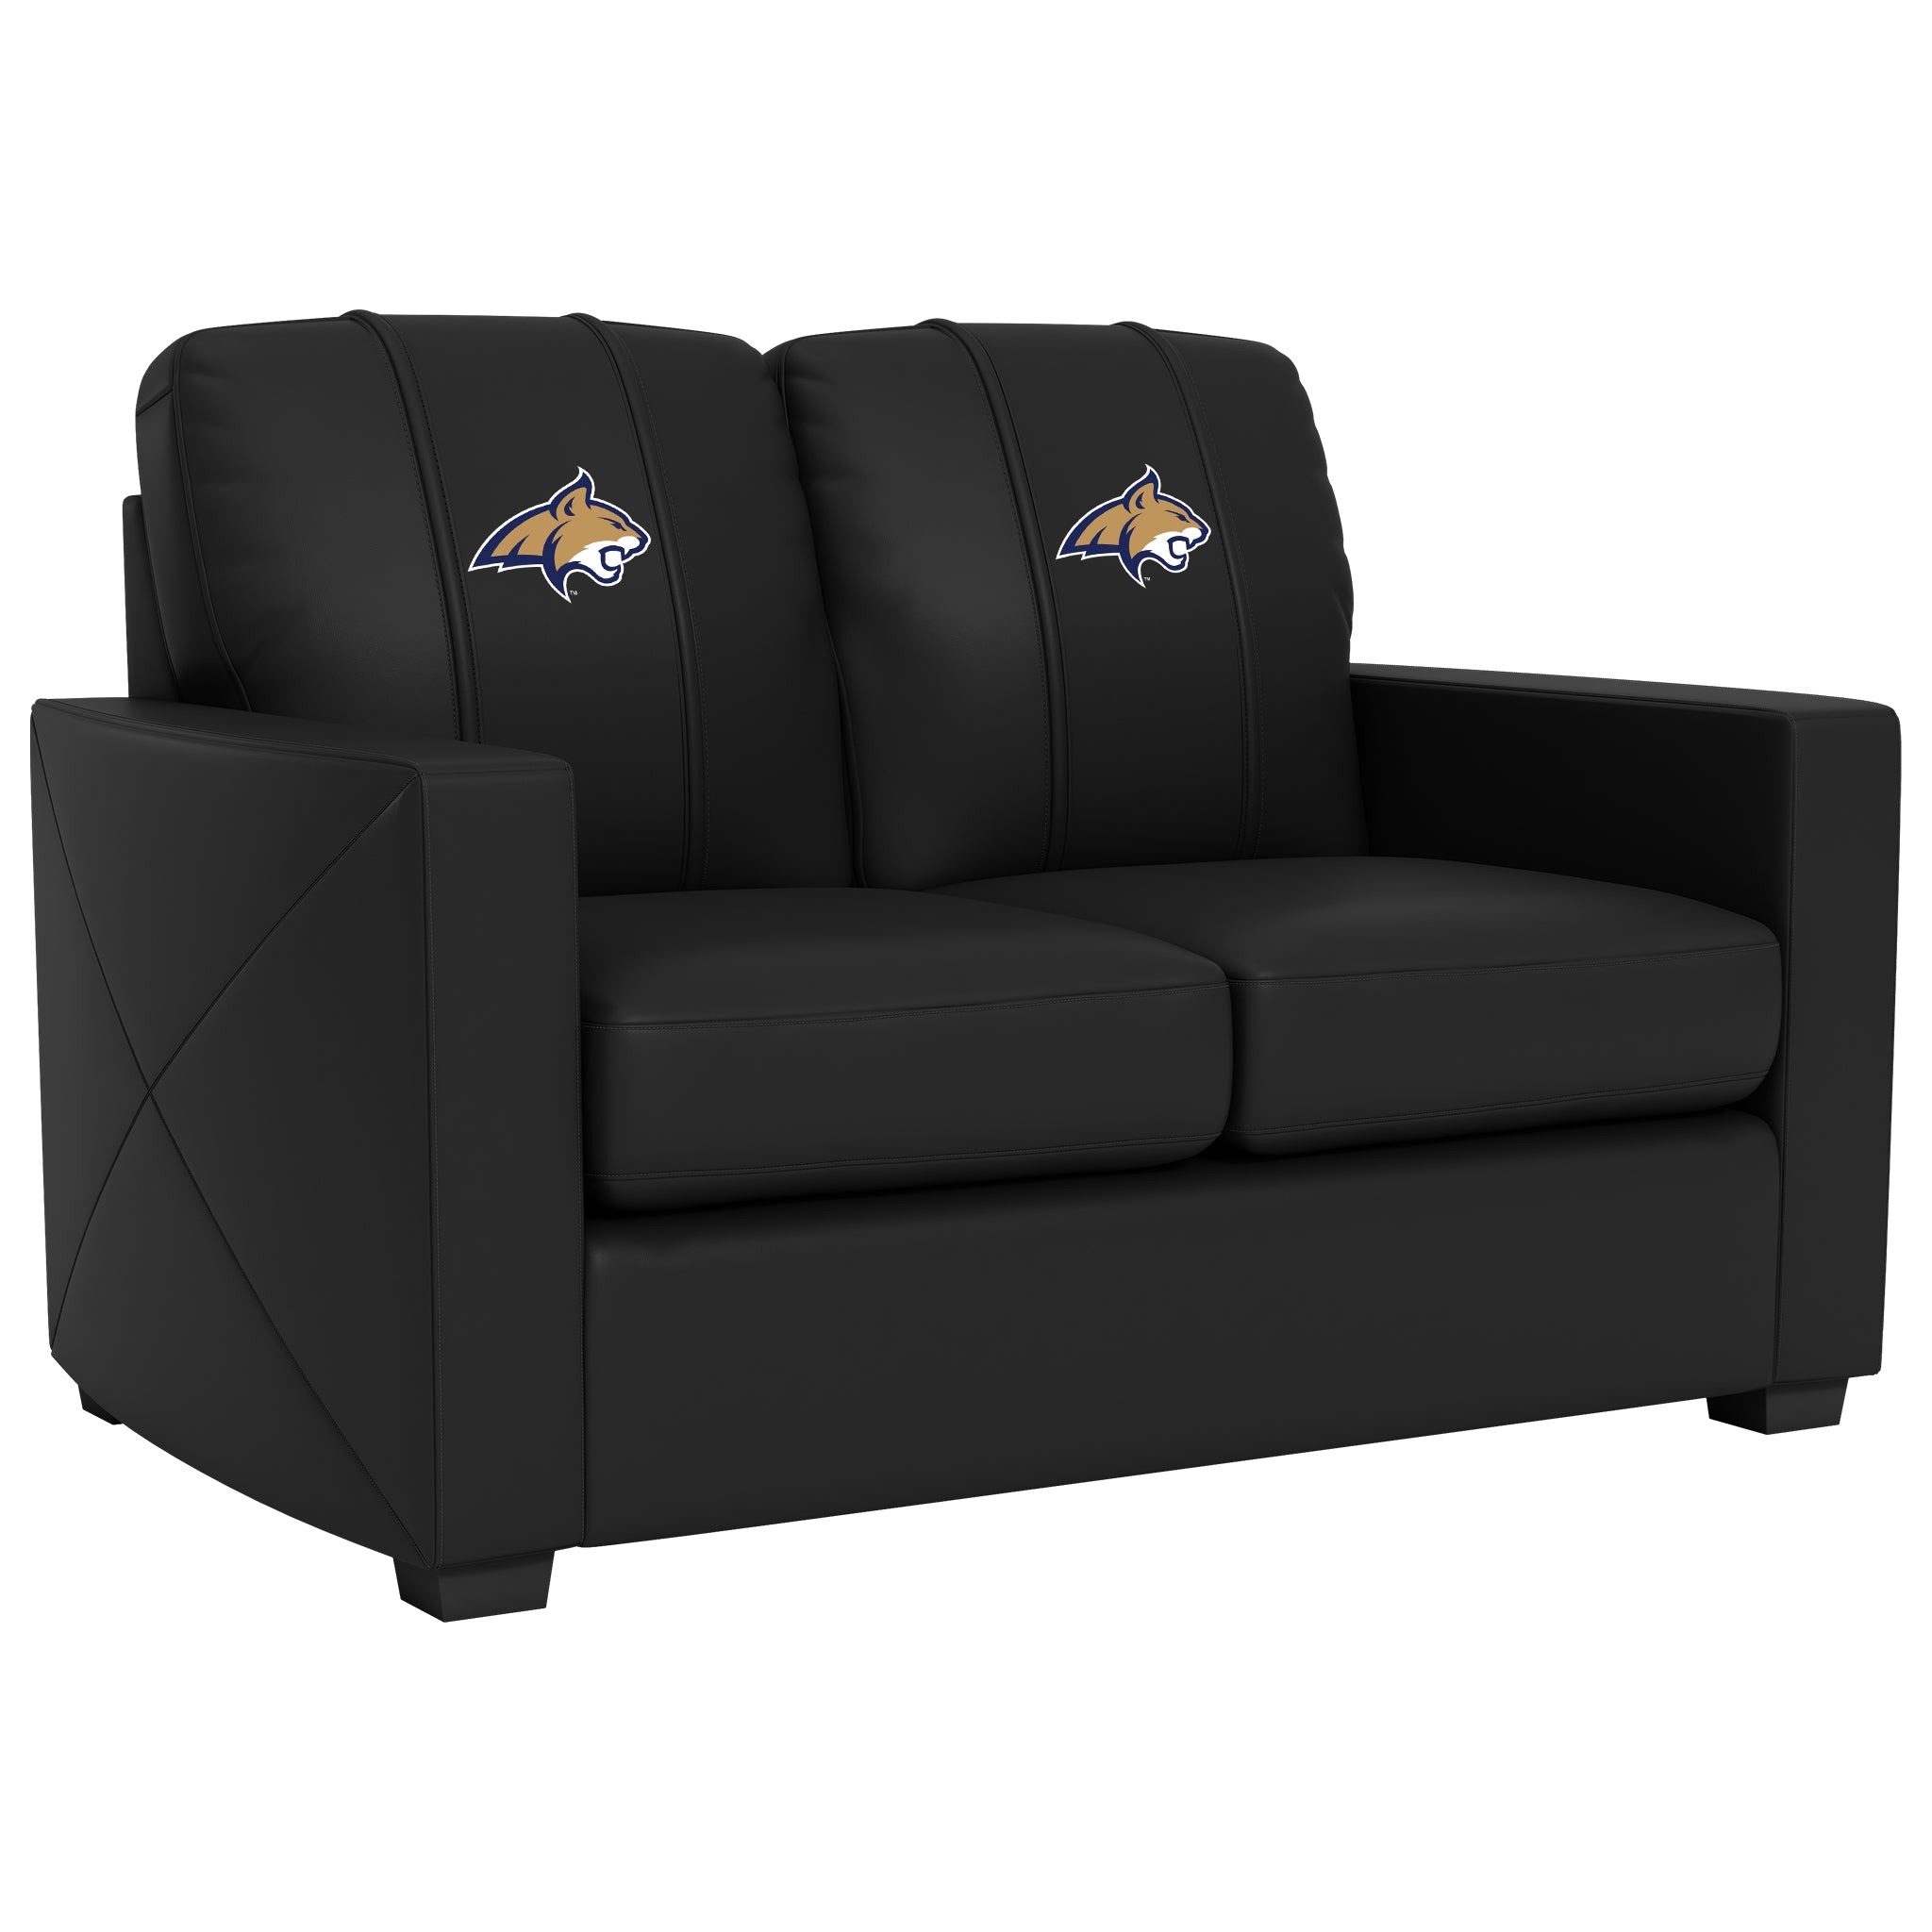 Montana State Bobcats  Silver Loveseat with Montana State Bobcats Primary Logo